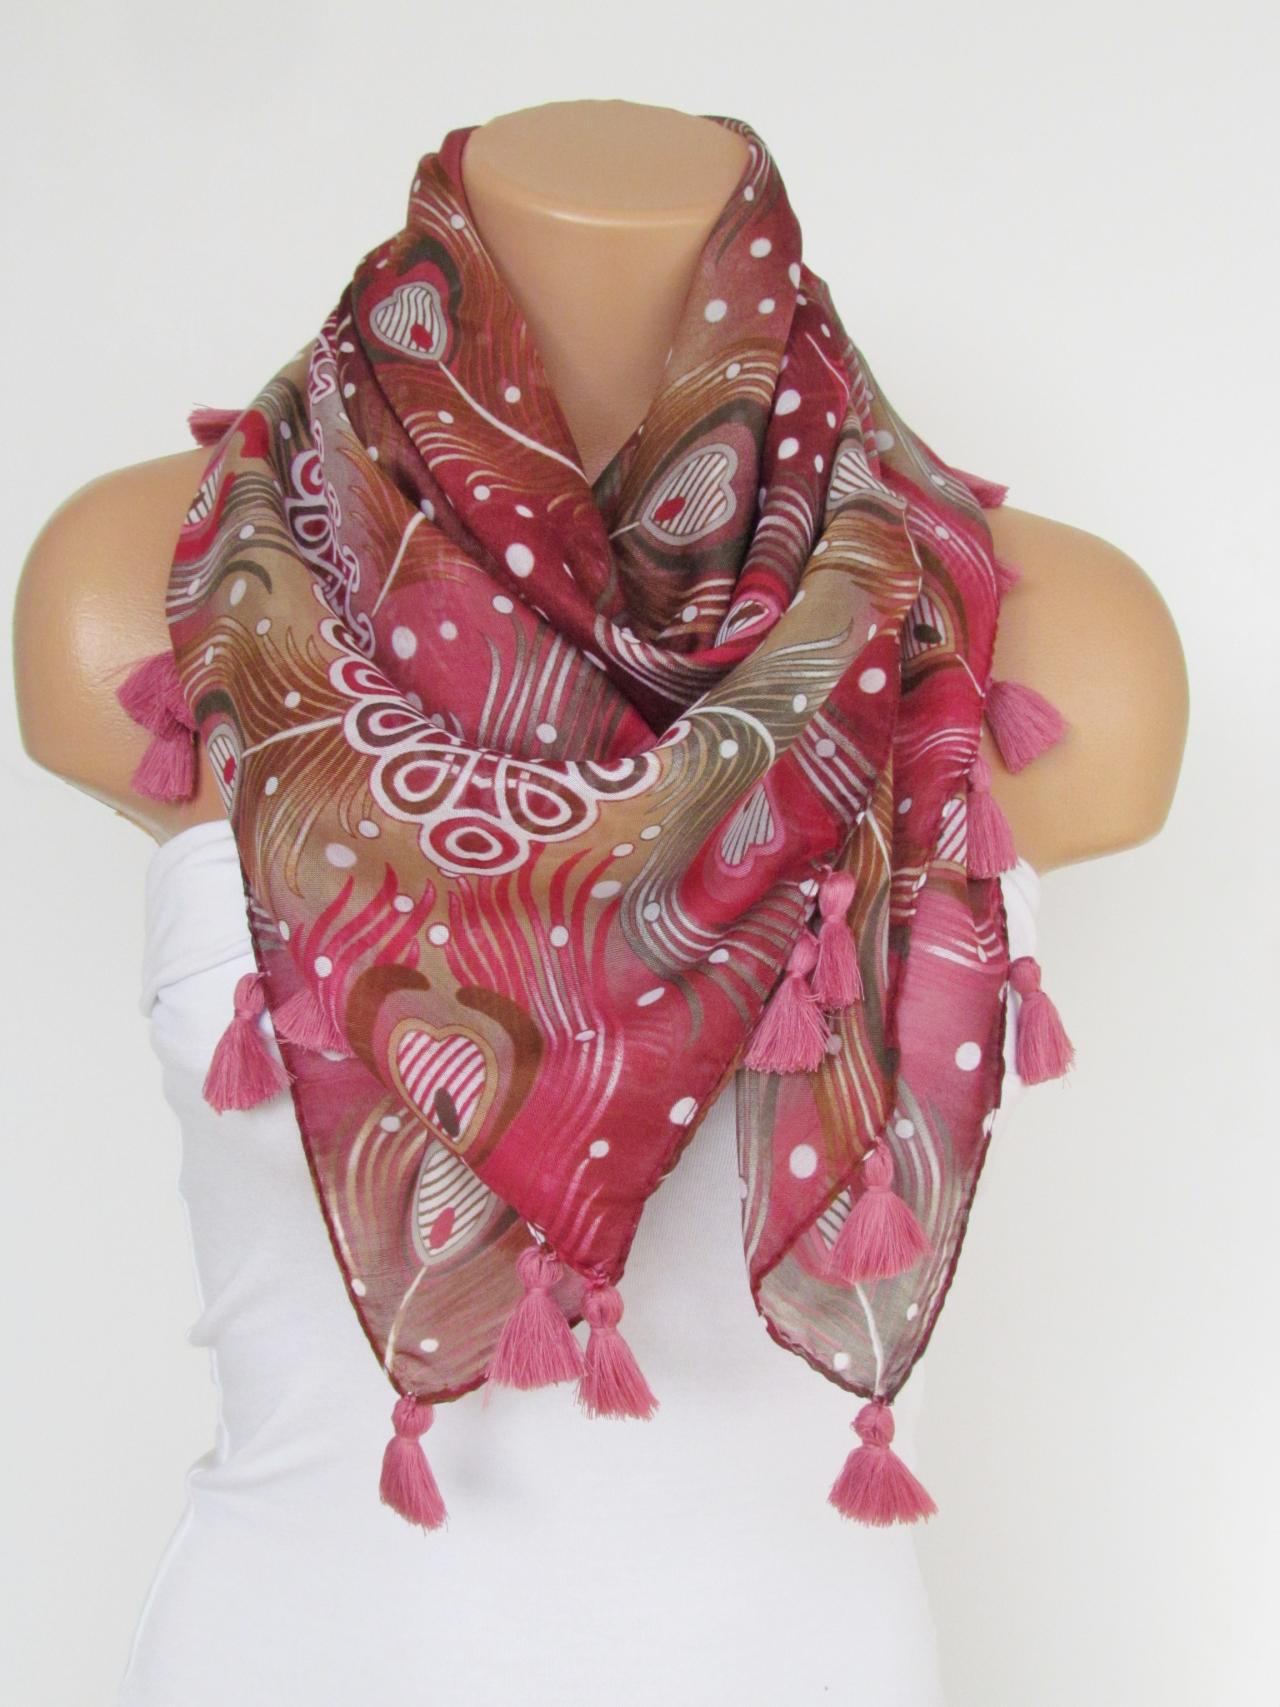 Pink Floral Scarf with fringe -Triangle Shawl Scarf-Fall Fashion-Necklace-Cotton Scarf- Neckwarmer- Infinity Scarf-Gift